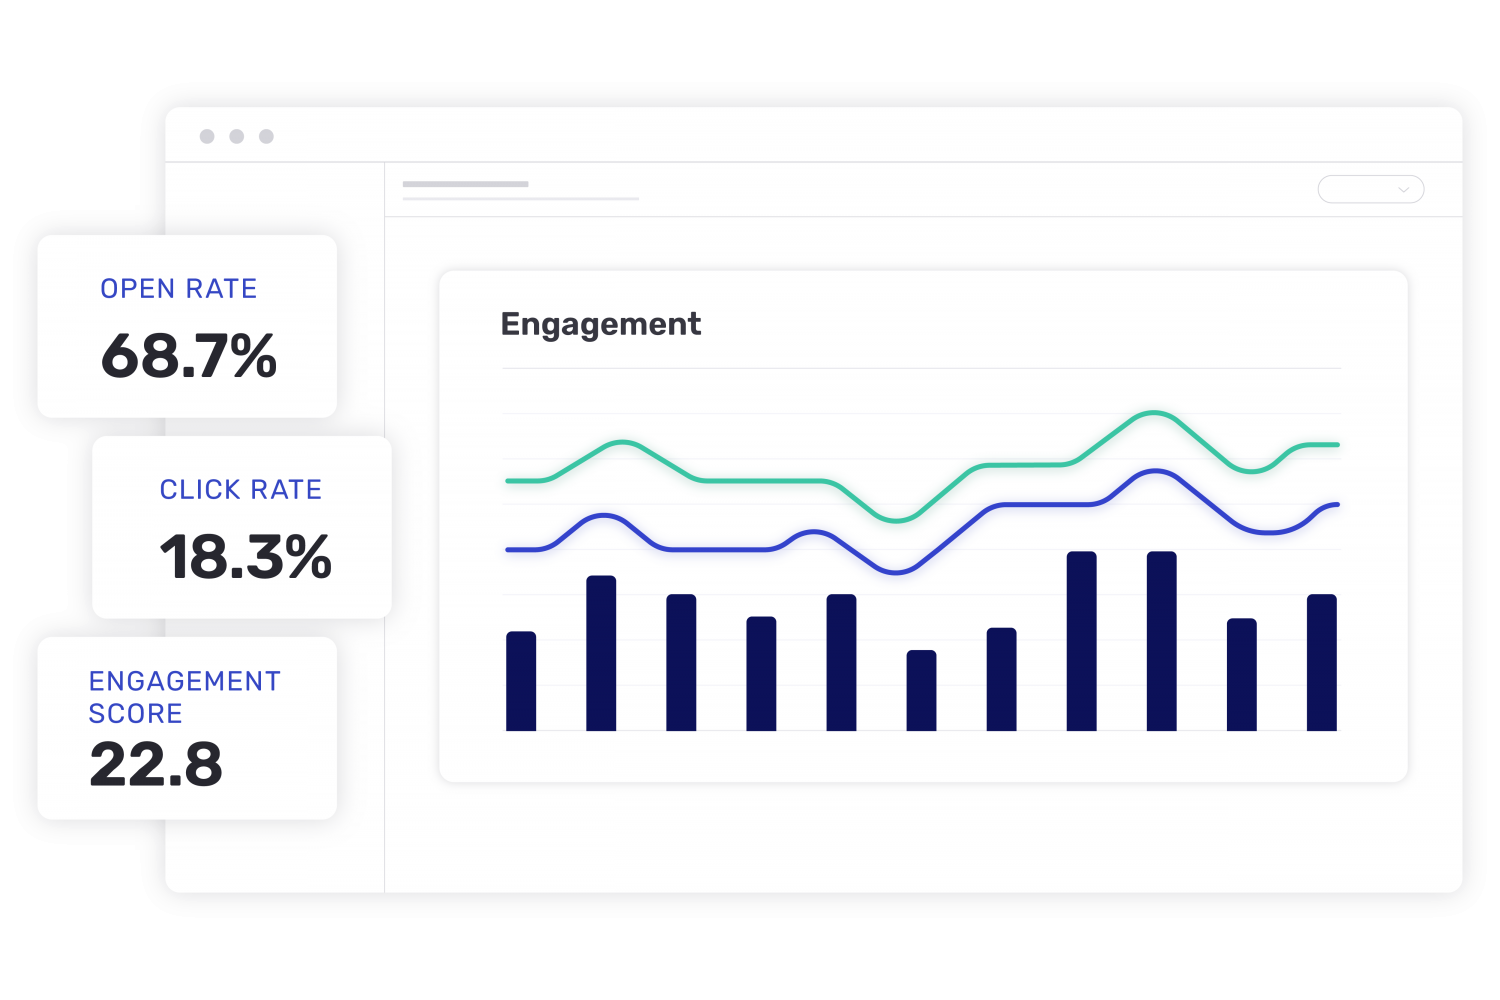 Engagement insight graphs show casing a 68.7% Open Rate, 18.3% Click Rate, 22.8% Engagement Score